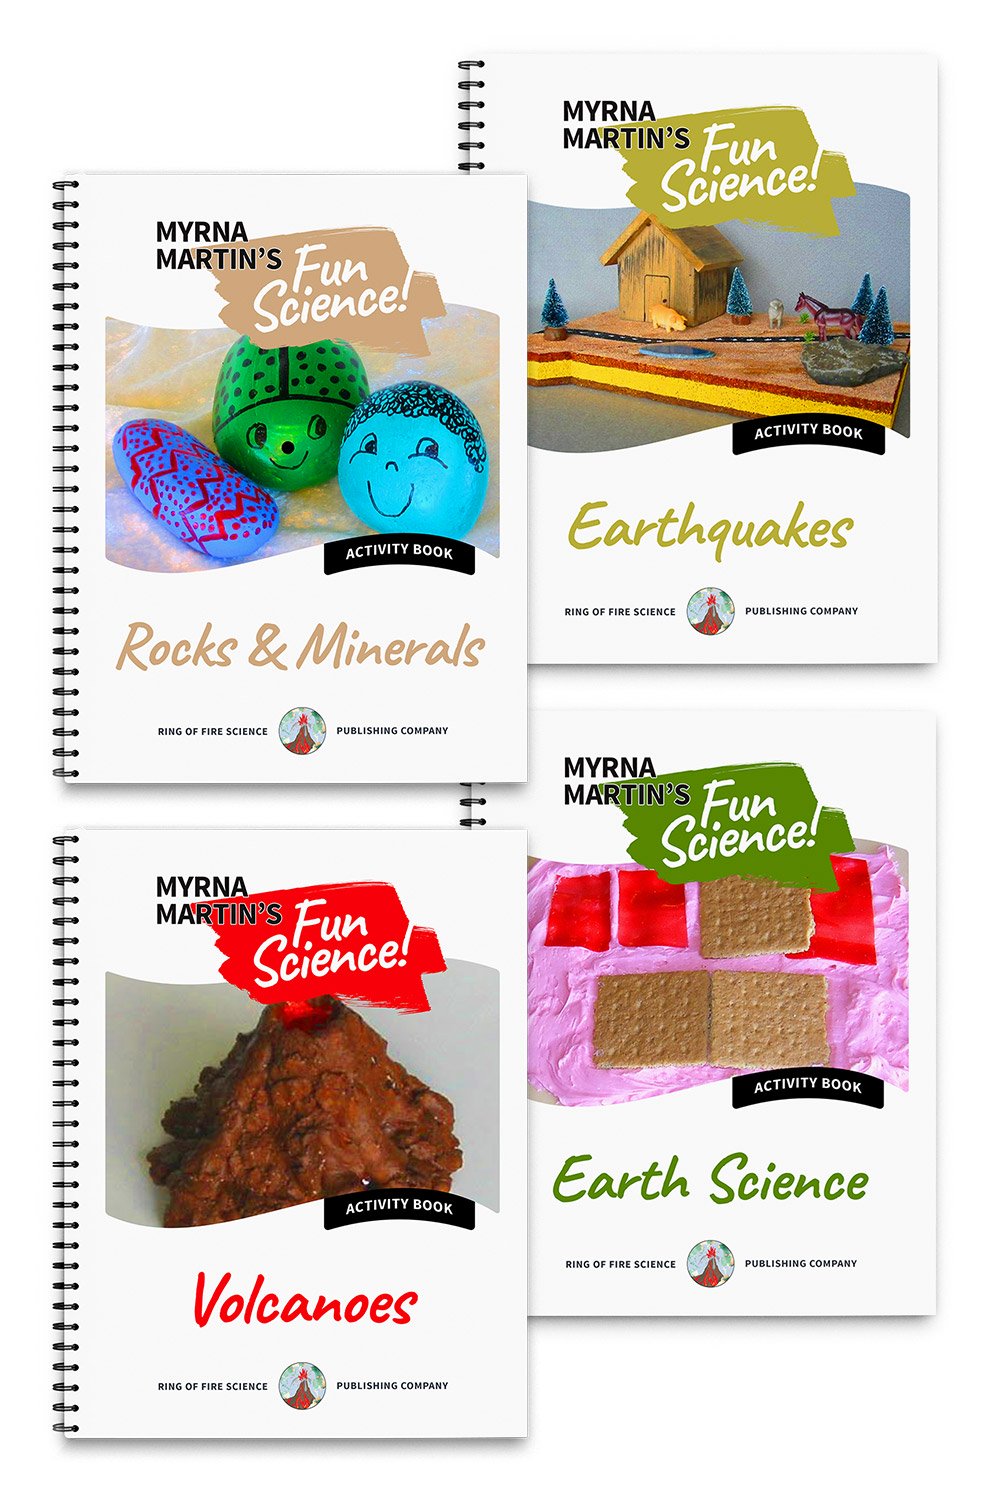 Fun Science Activity Books Package by Myrna Martin